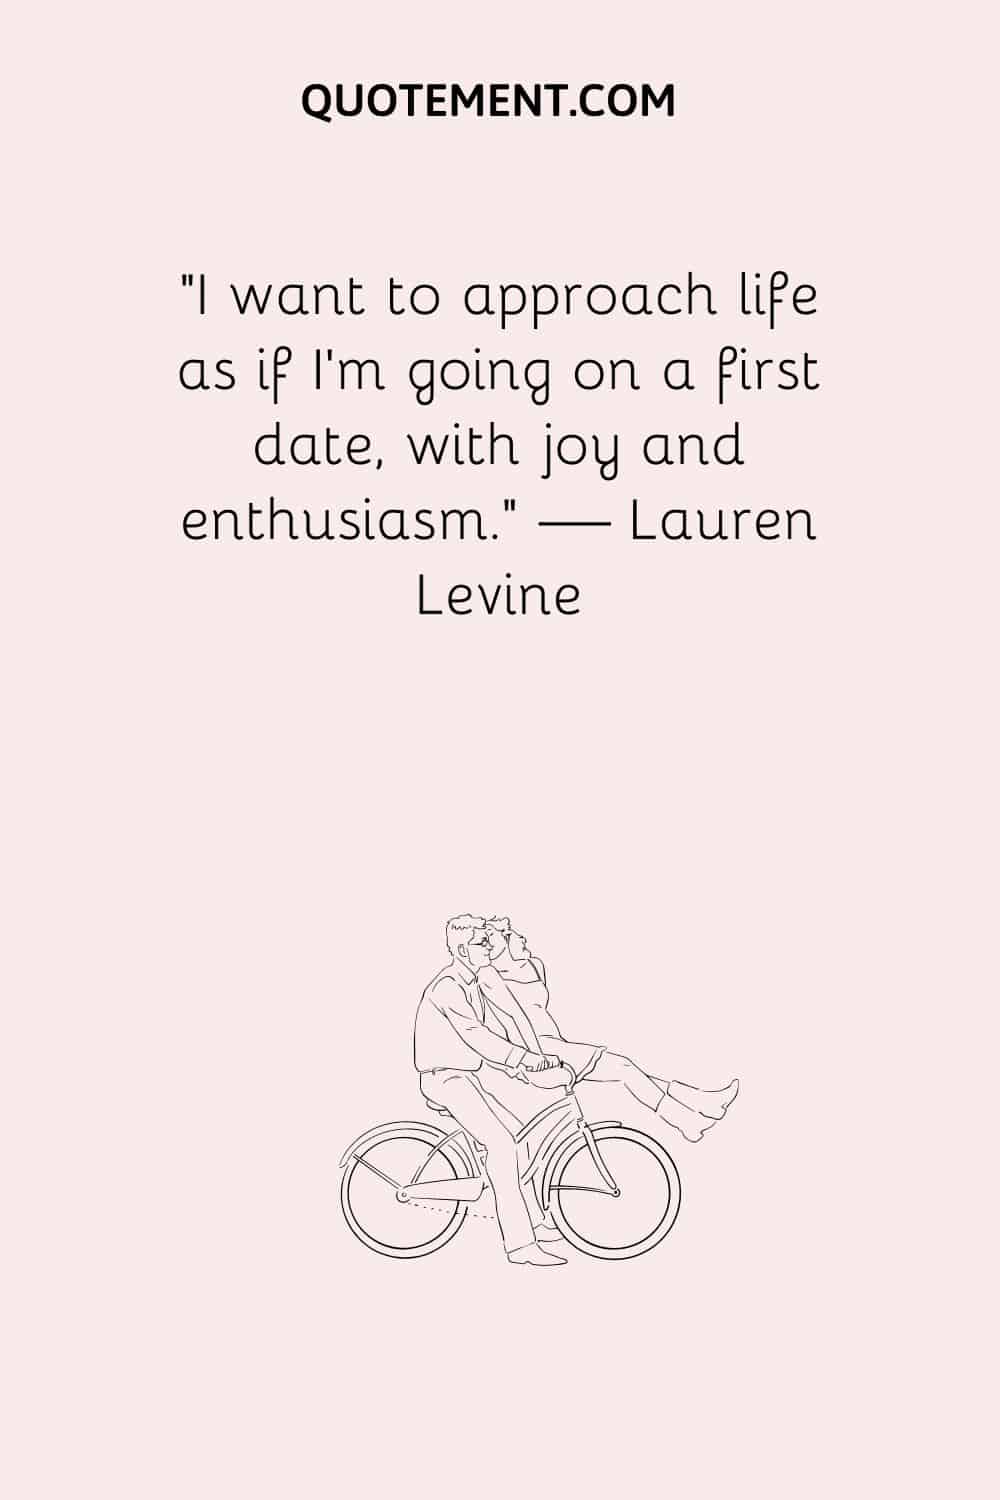 a couple on a bicycle image representing date night quote